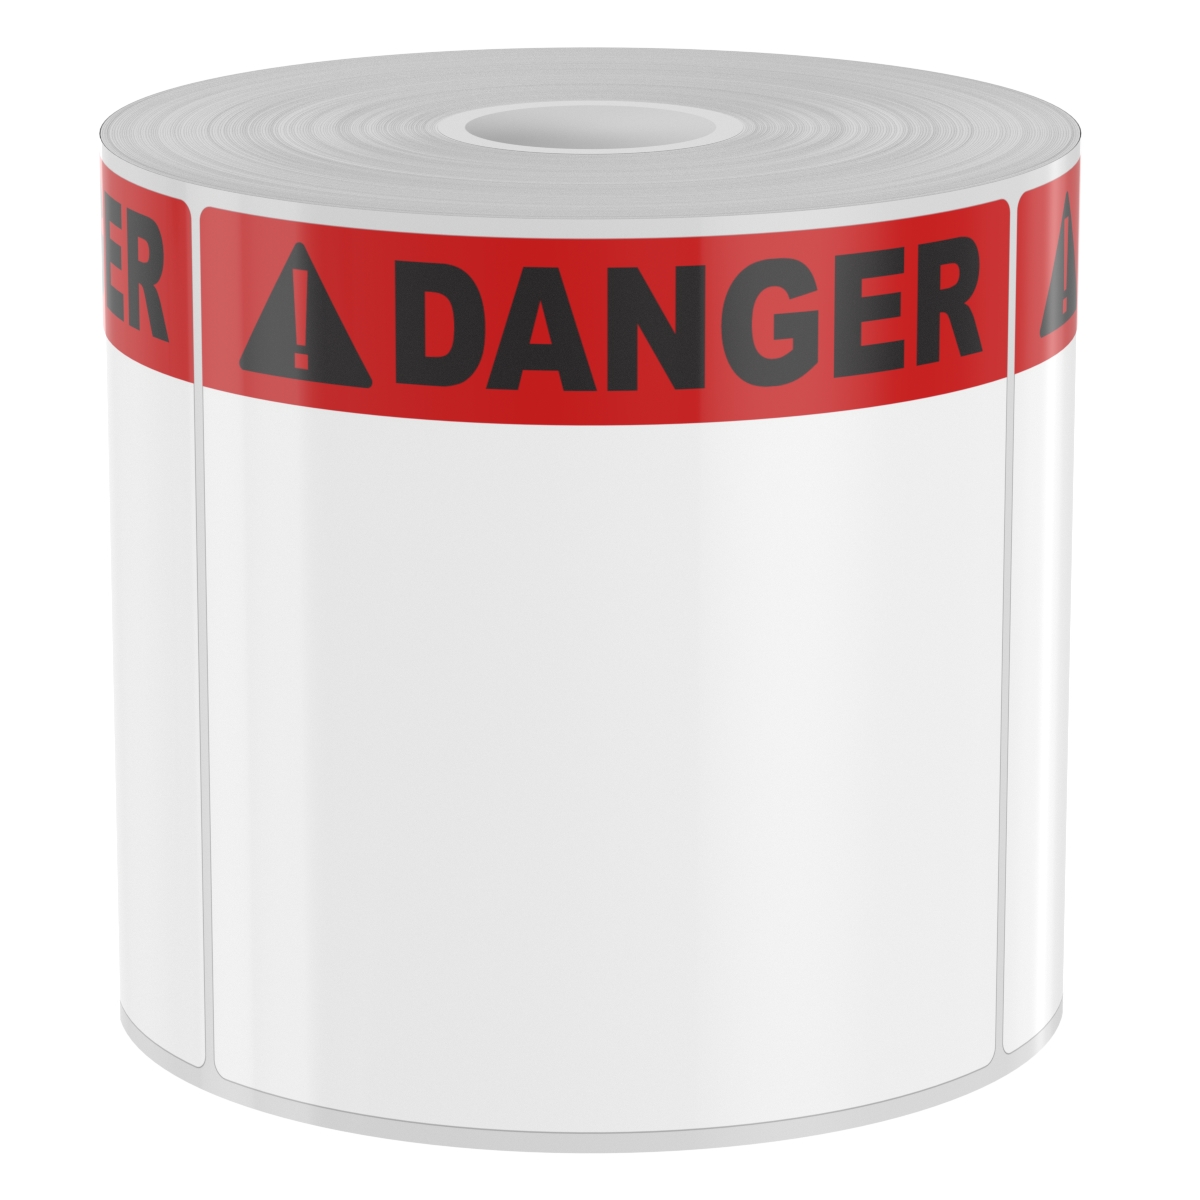 Ask a question about 250 4" x 4" High-Performance Red Band with Black Danger